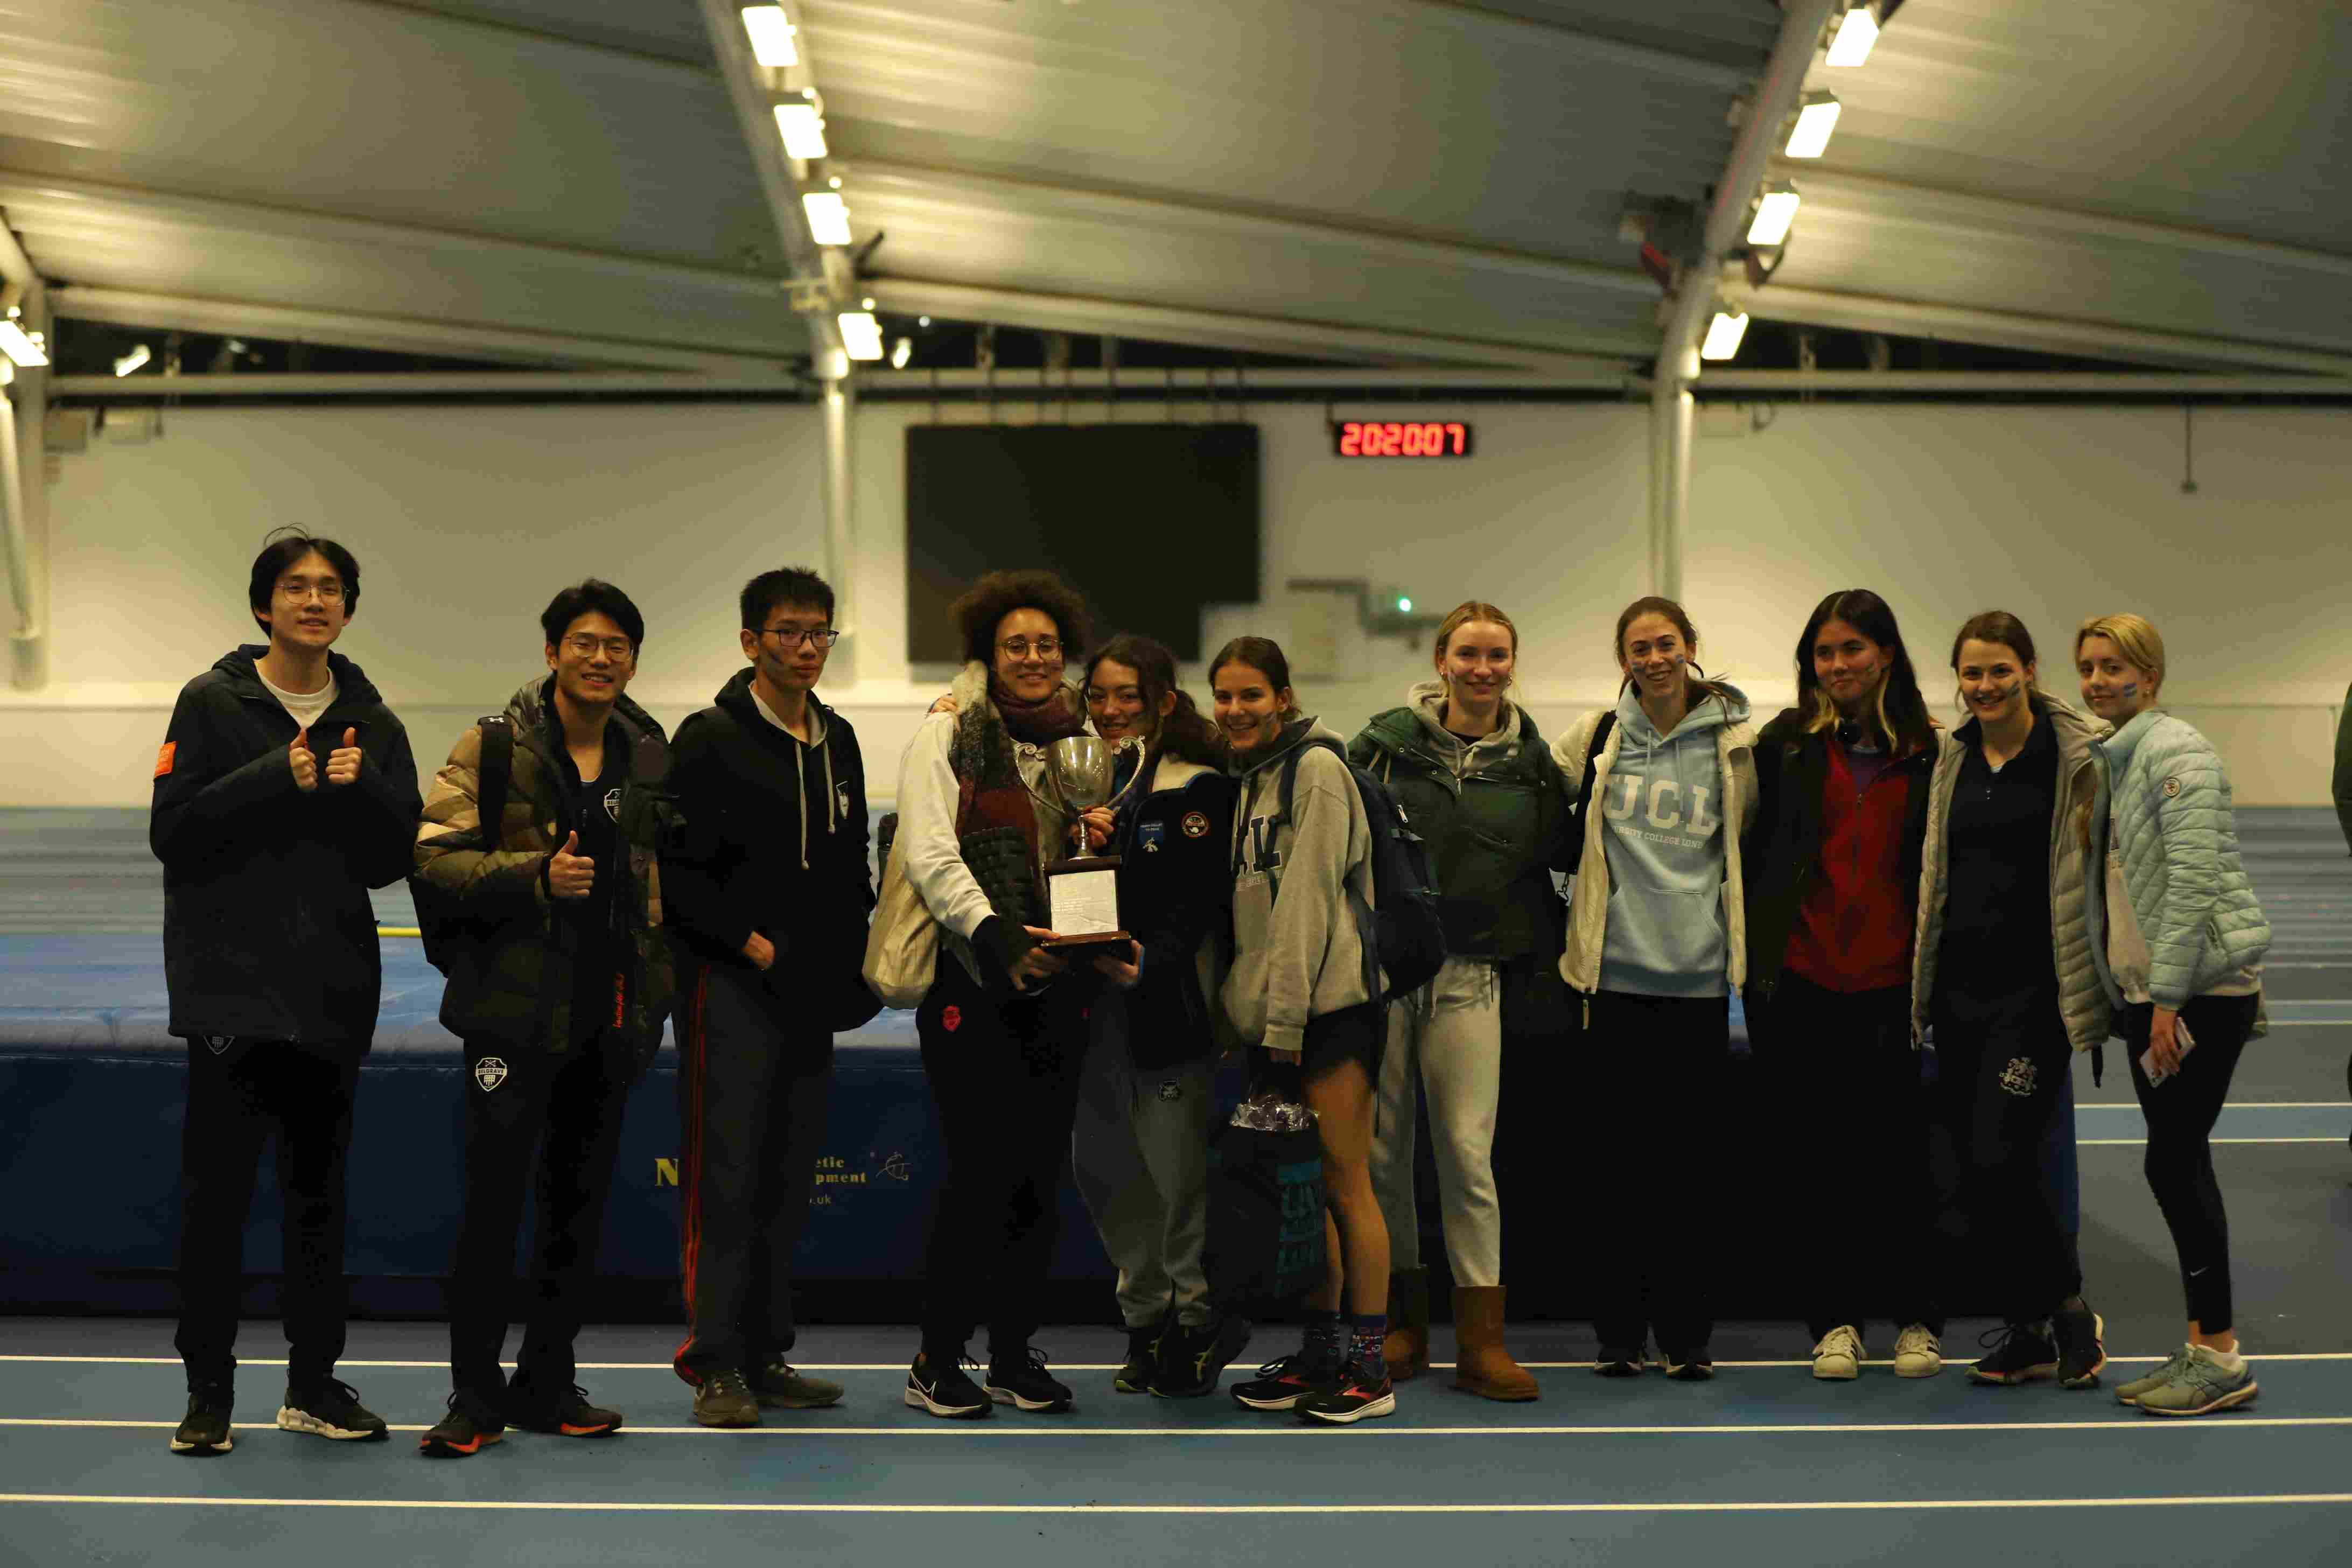 Group photo of runners after LUCA indoors